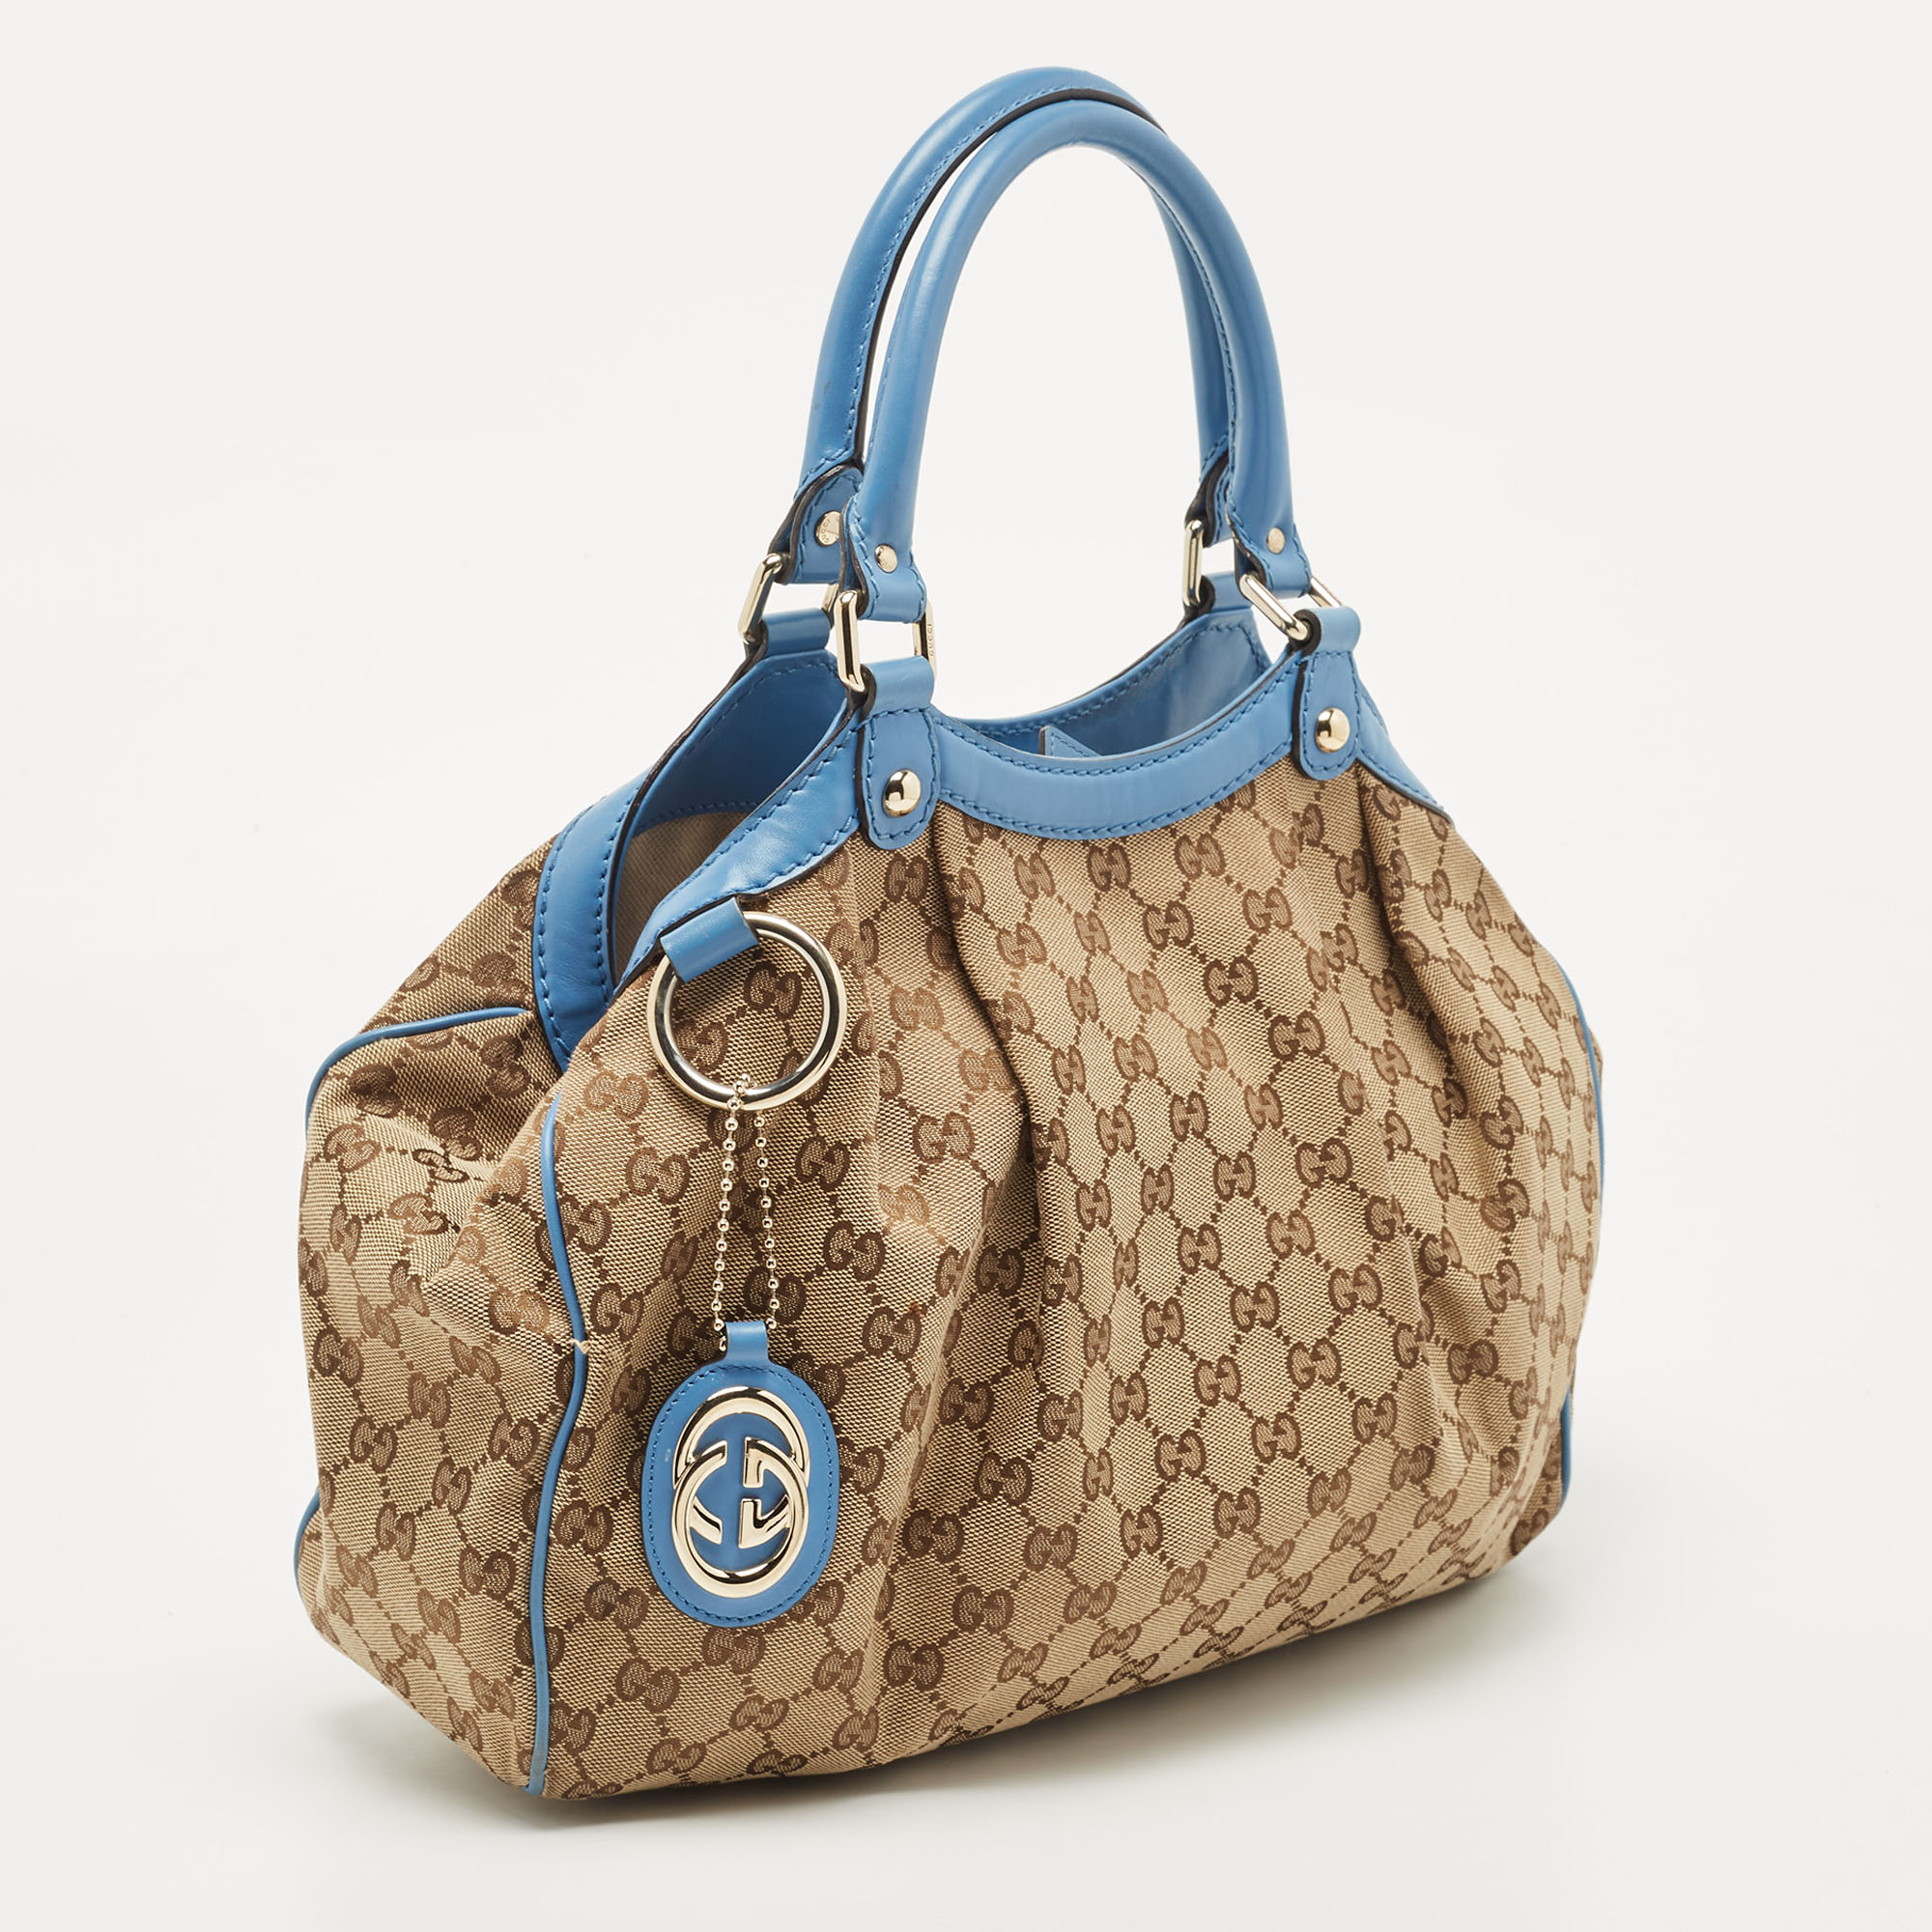 Gucci Blue/Beige GG Canvas And Leather Medium Sukey Tote